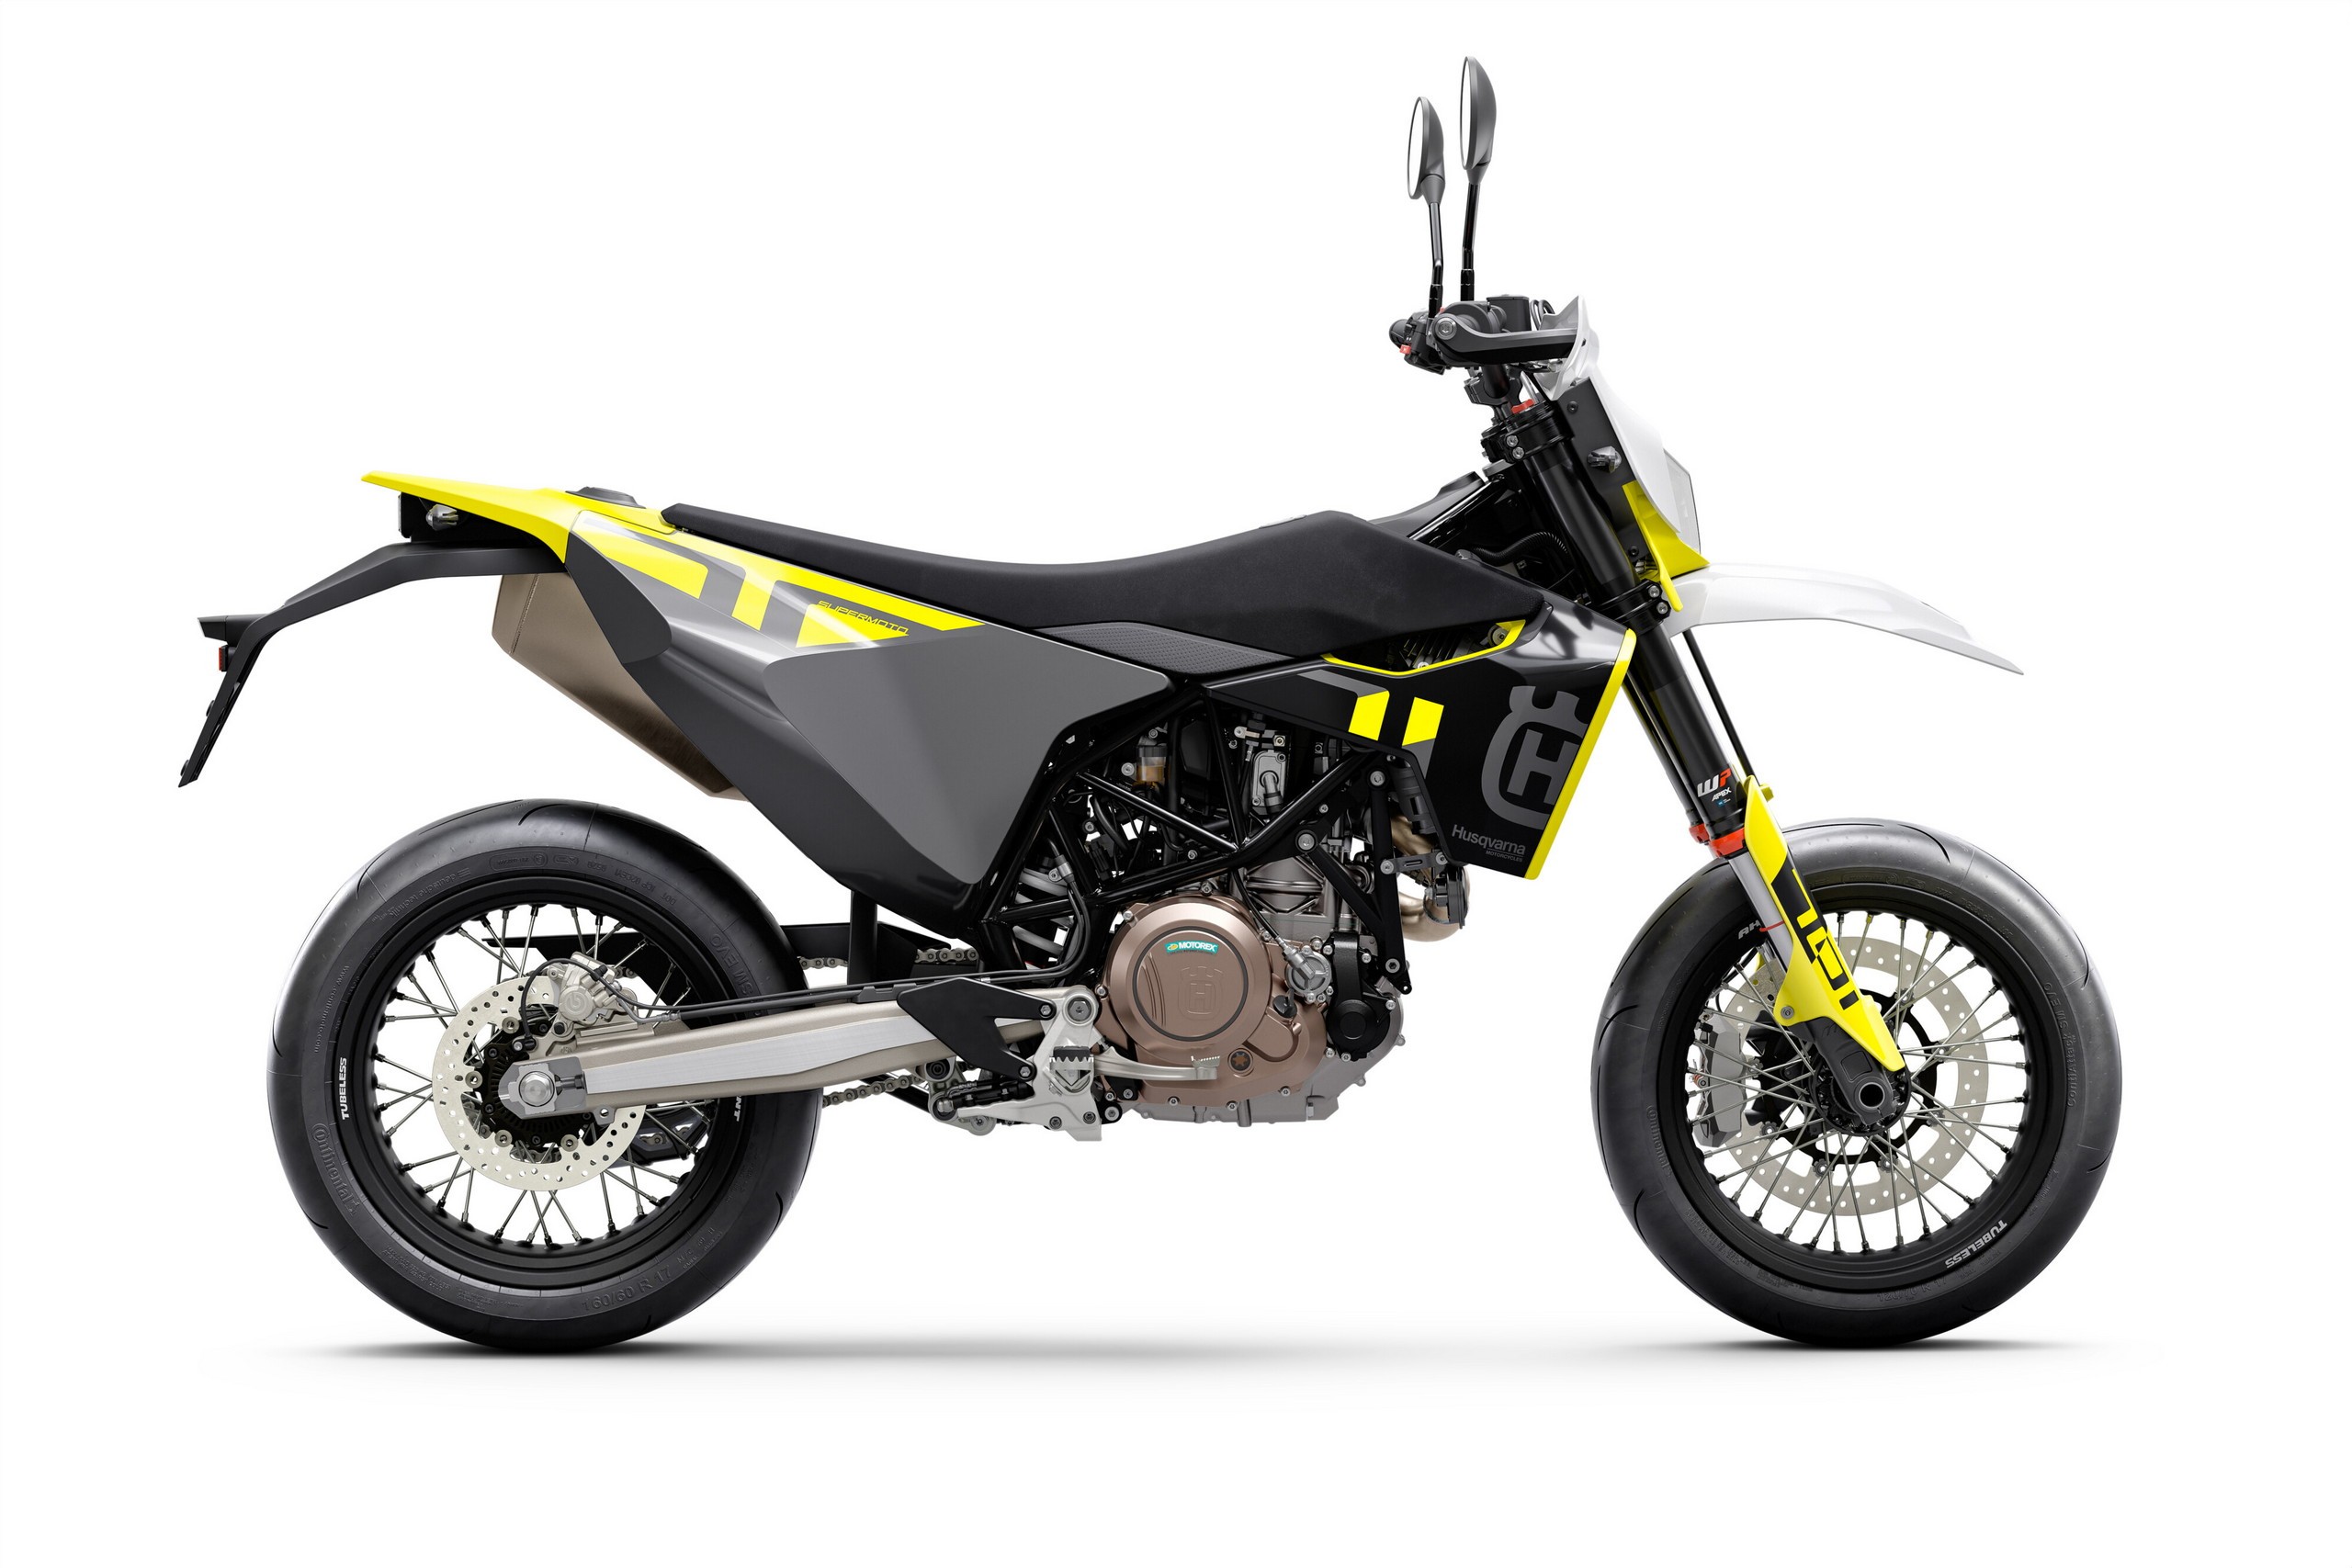 Husqvarna’s New 701 Supermoto Delivers High Performance on Any Terrain